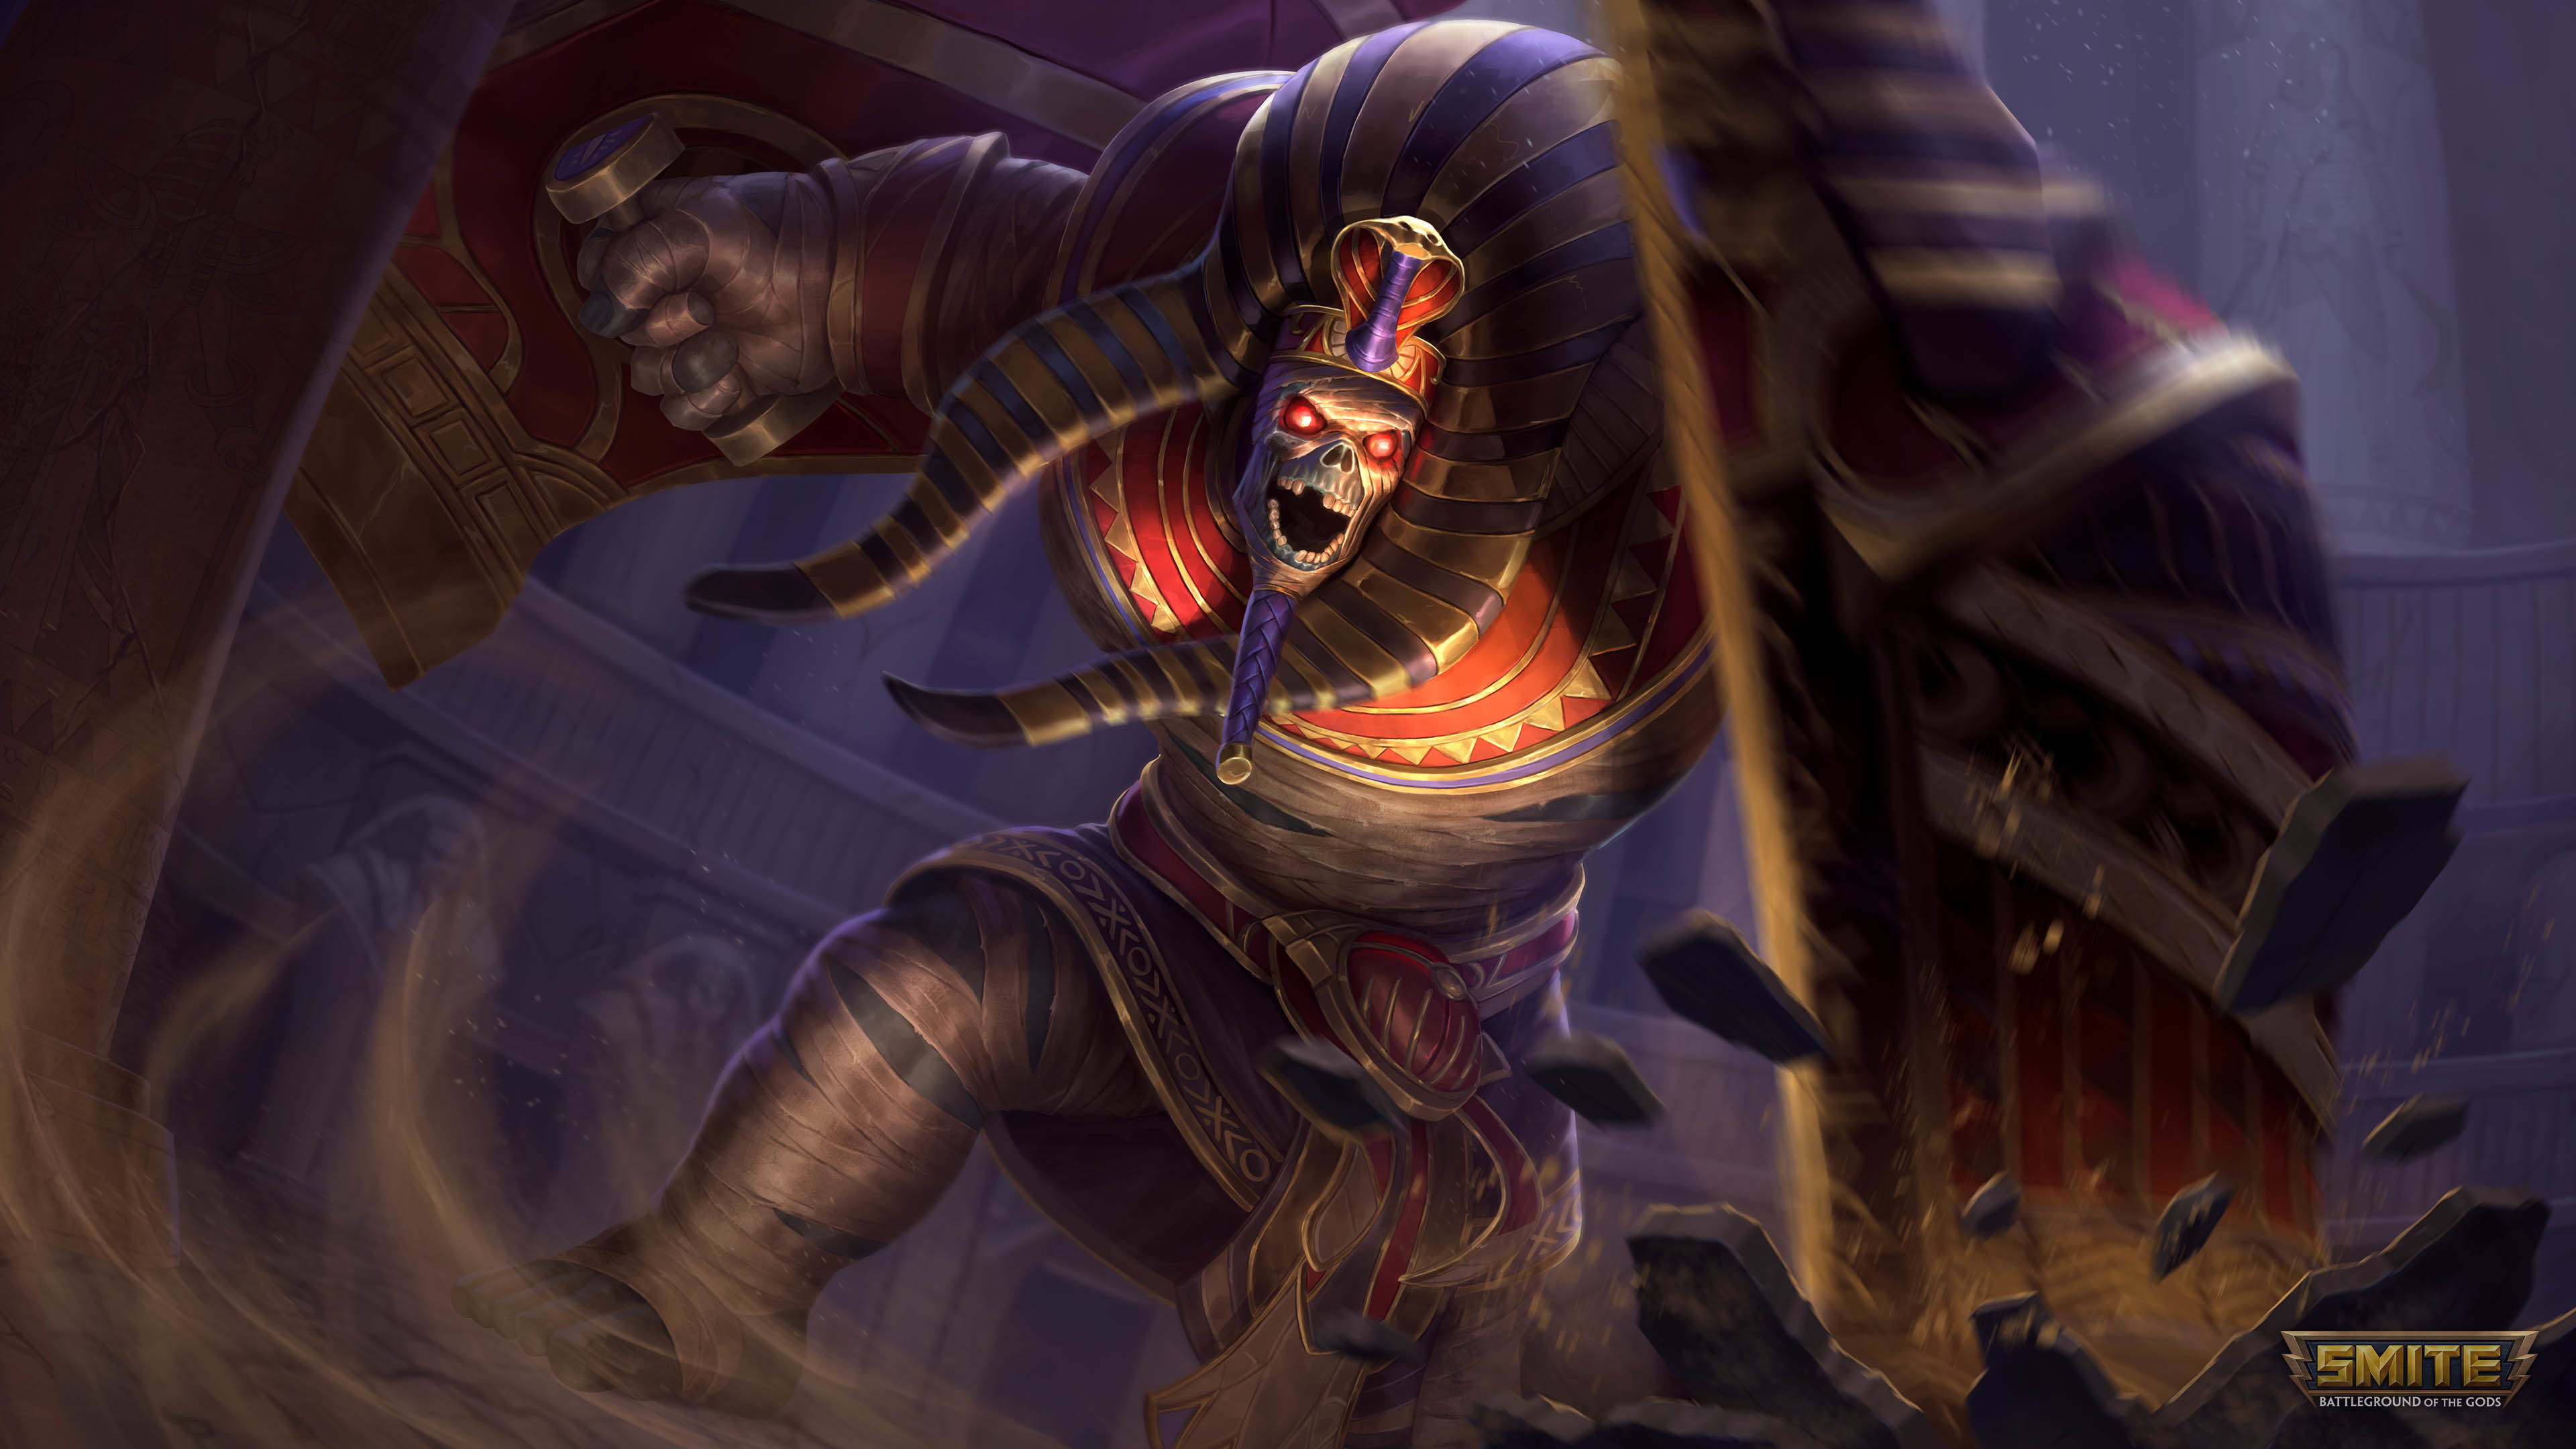 Video Game Smite HD Wallpaper Background Image. 